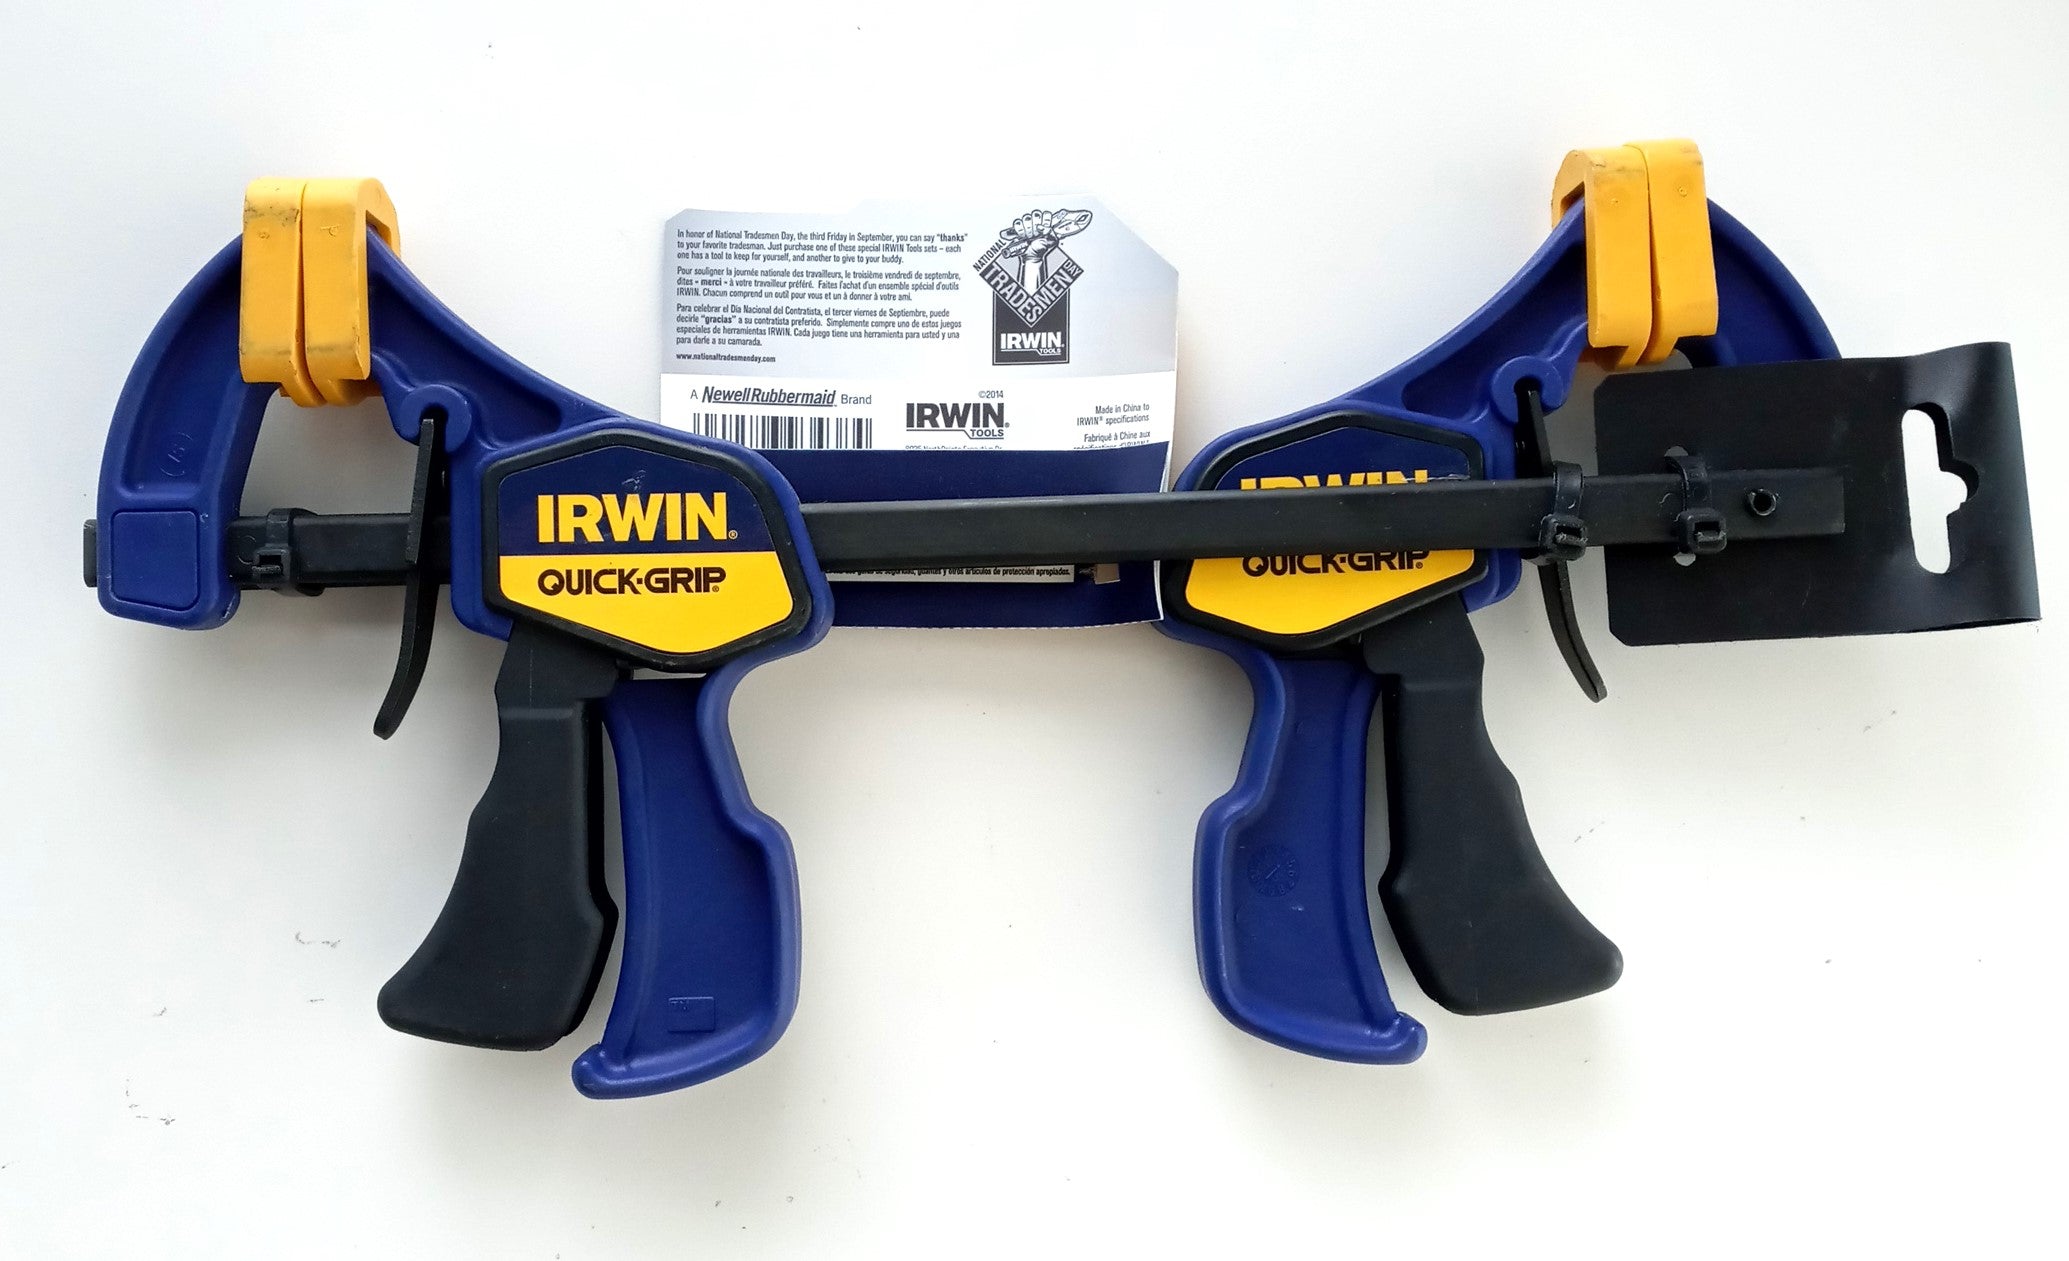 Irwin Quick-Grip 1908534 6" 2 Piece Mini One-Handed Bar Clamp